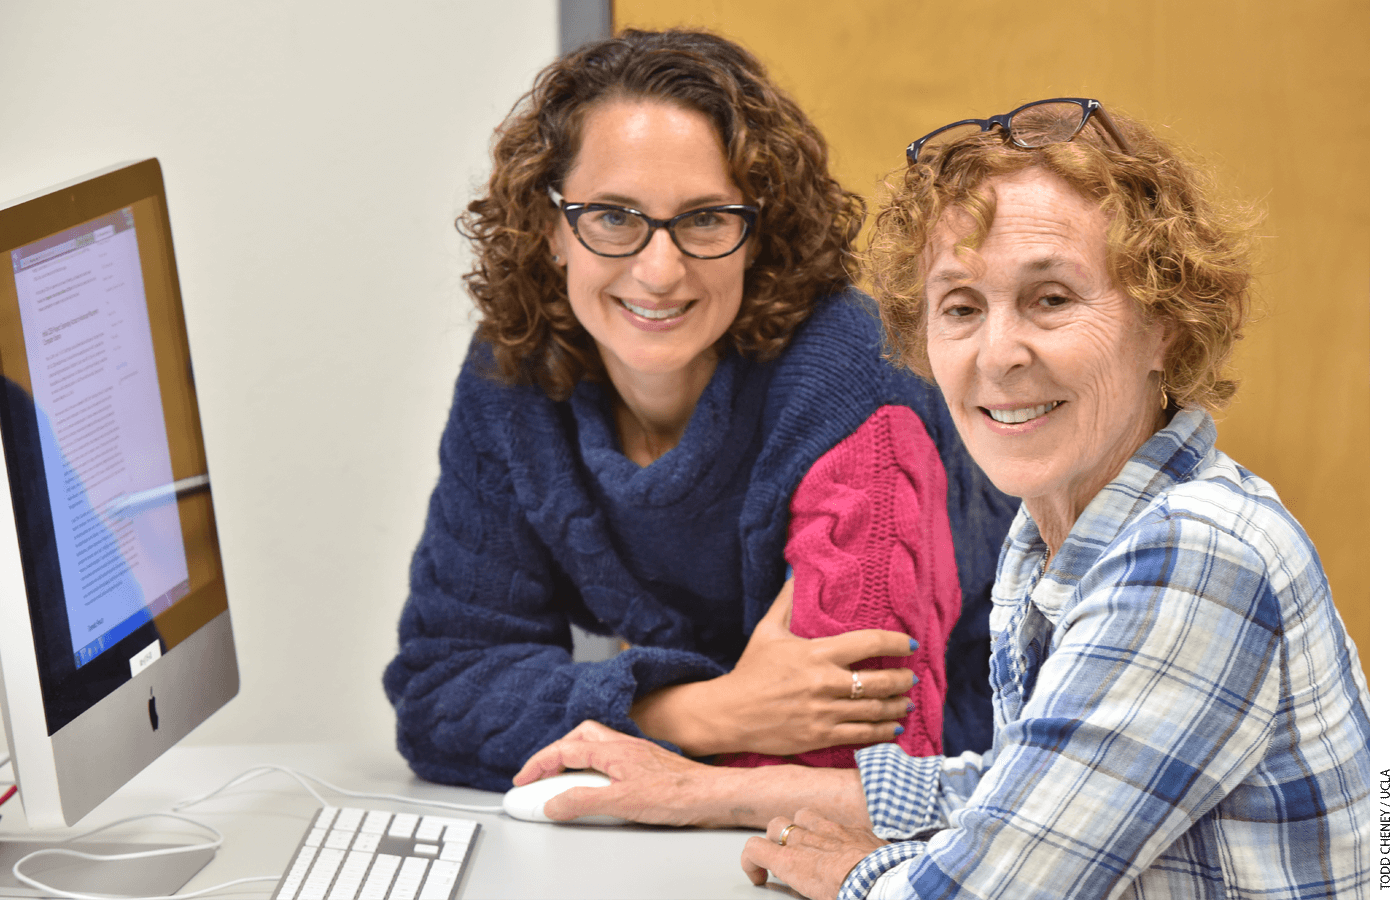 Julie Flapan (left) and Jane Margolis caution against schools' adding computer-science class at the expense of other courses.